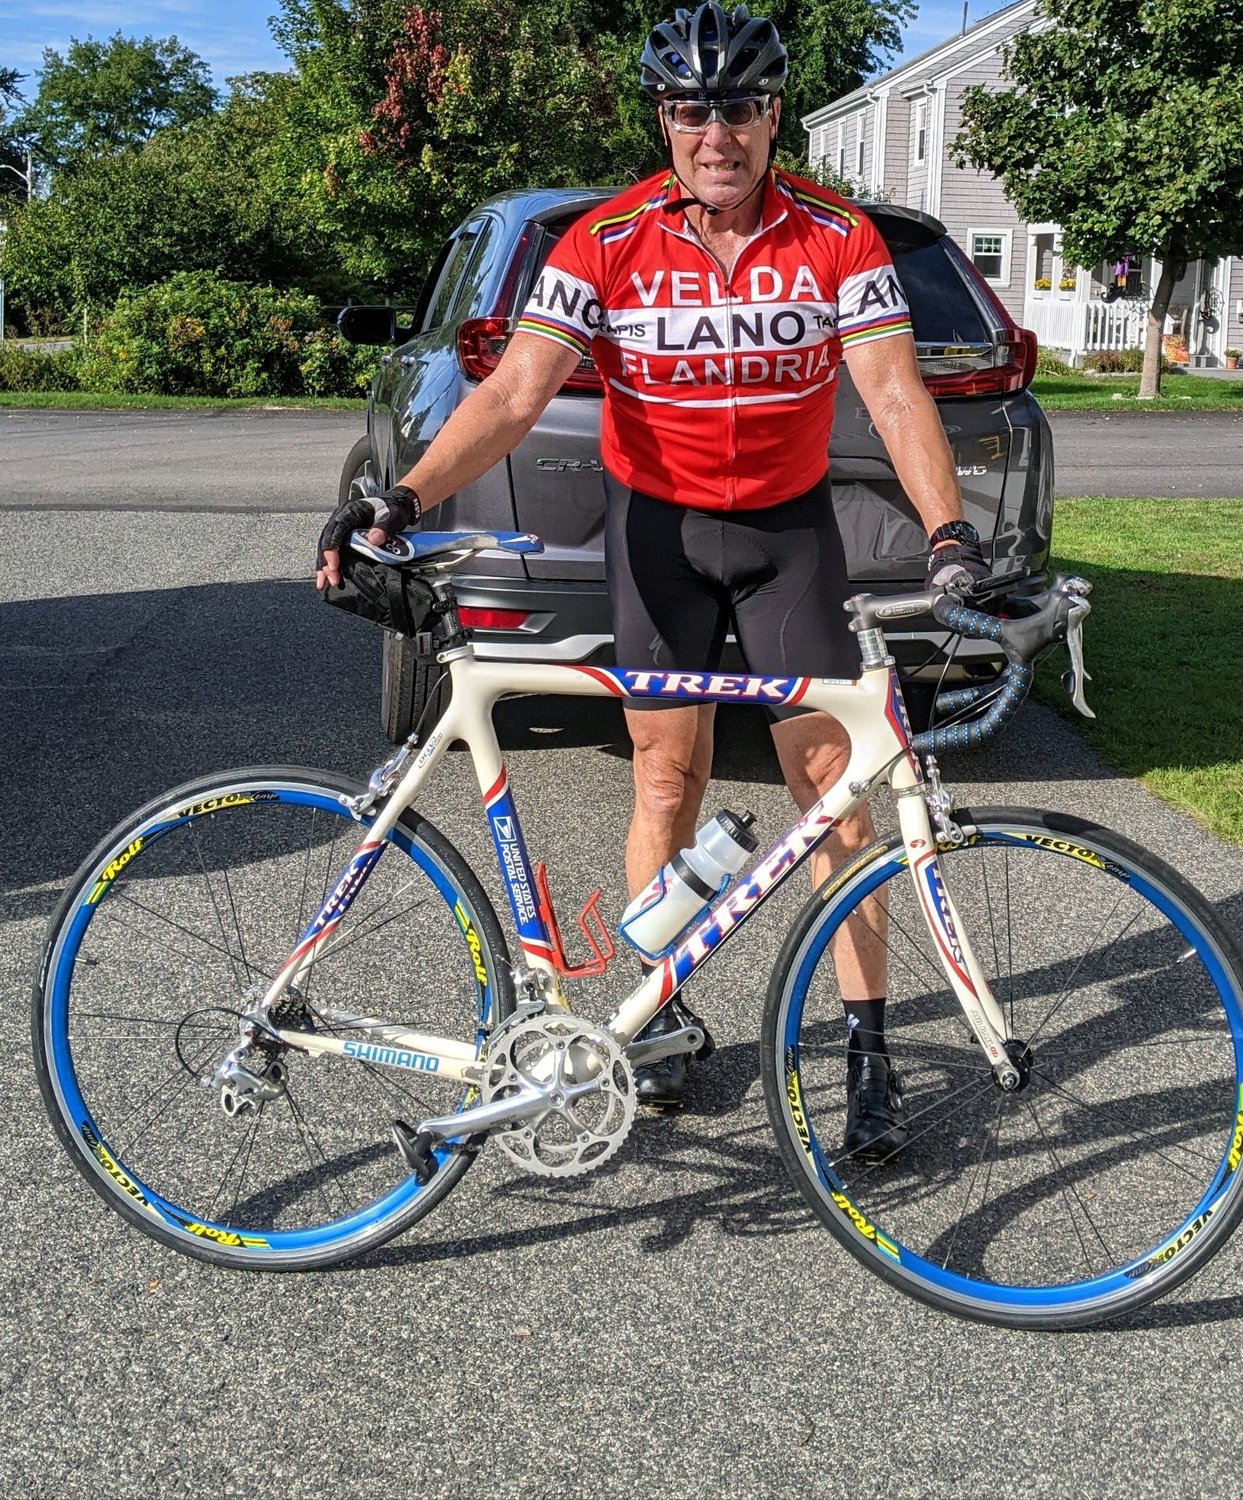 Mich Myette, a Bristol resident and avid cyclist, was severely injured following a collision on the East Bay Bike Path in Warren last month. After the other rider vanished, he is looking for answers.